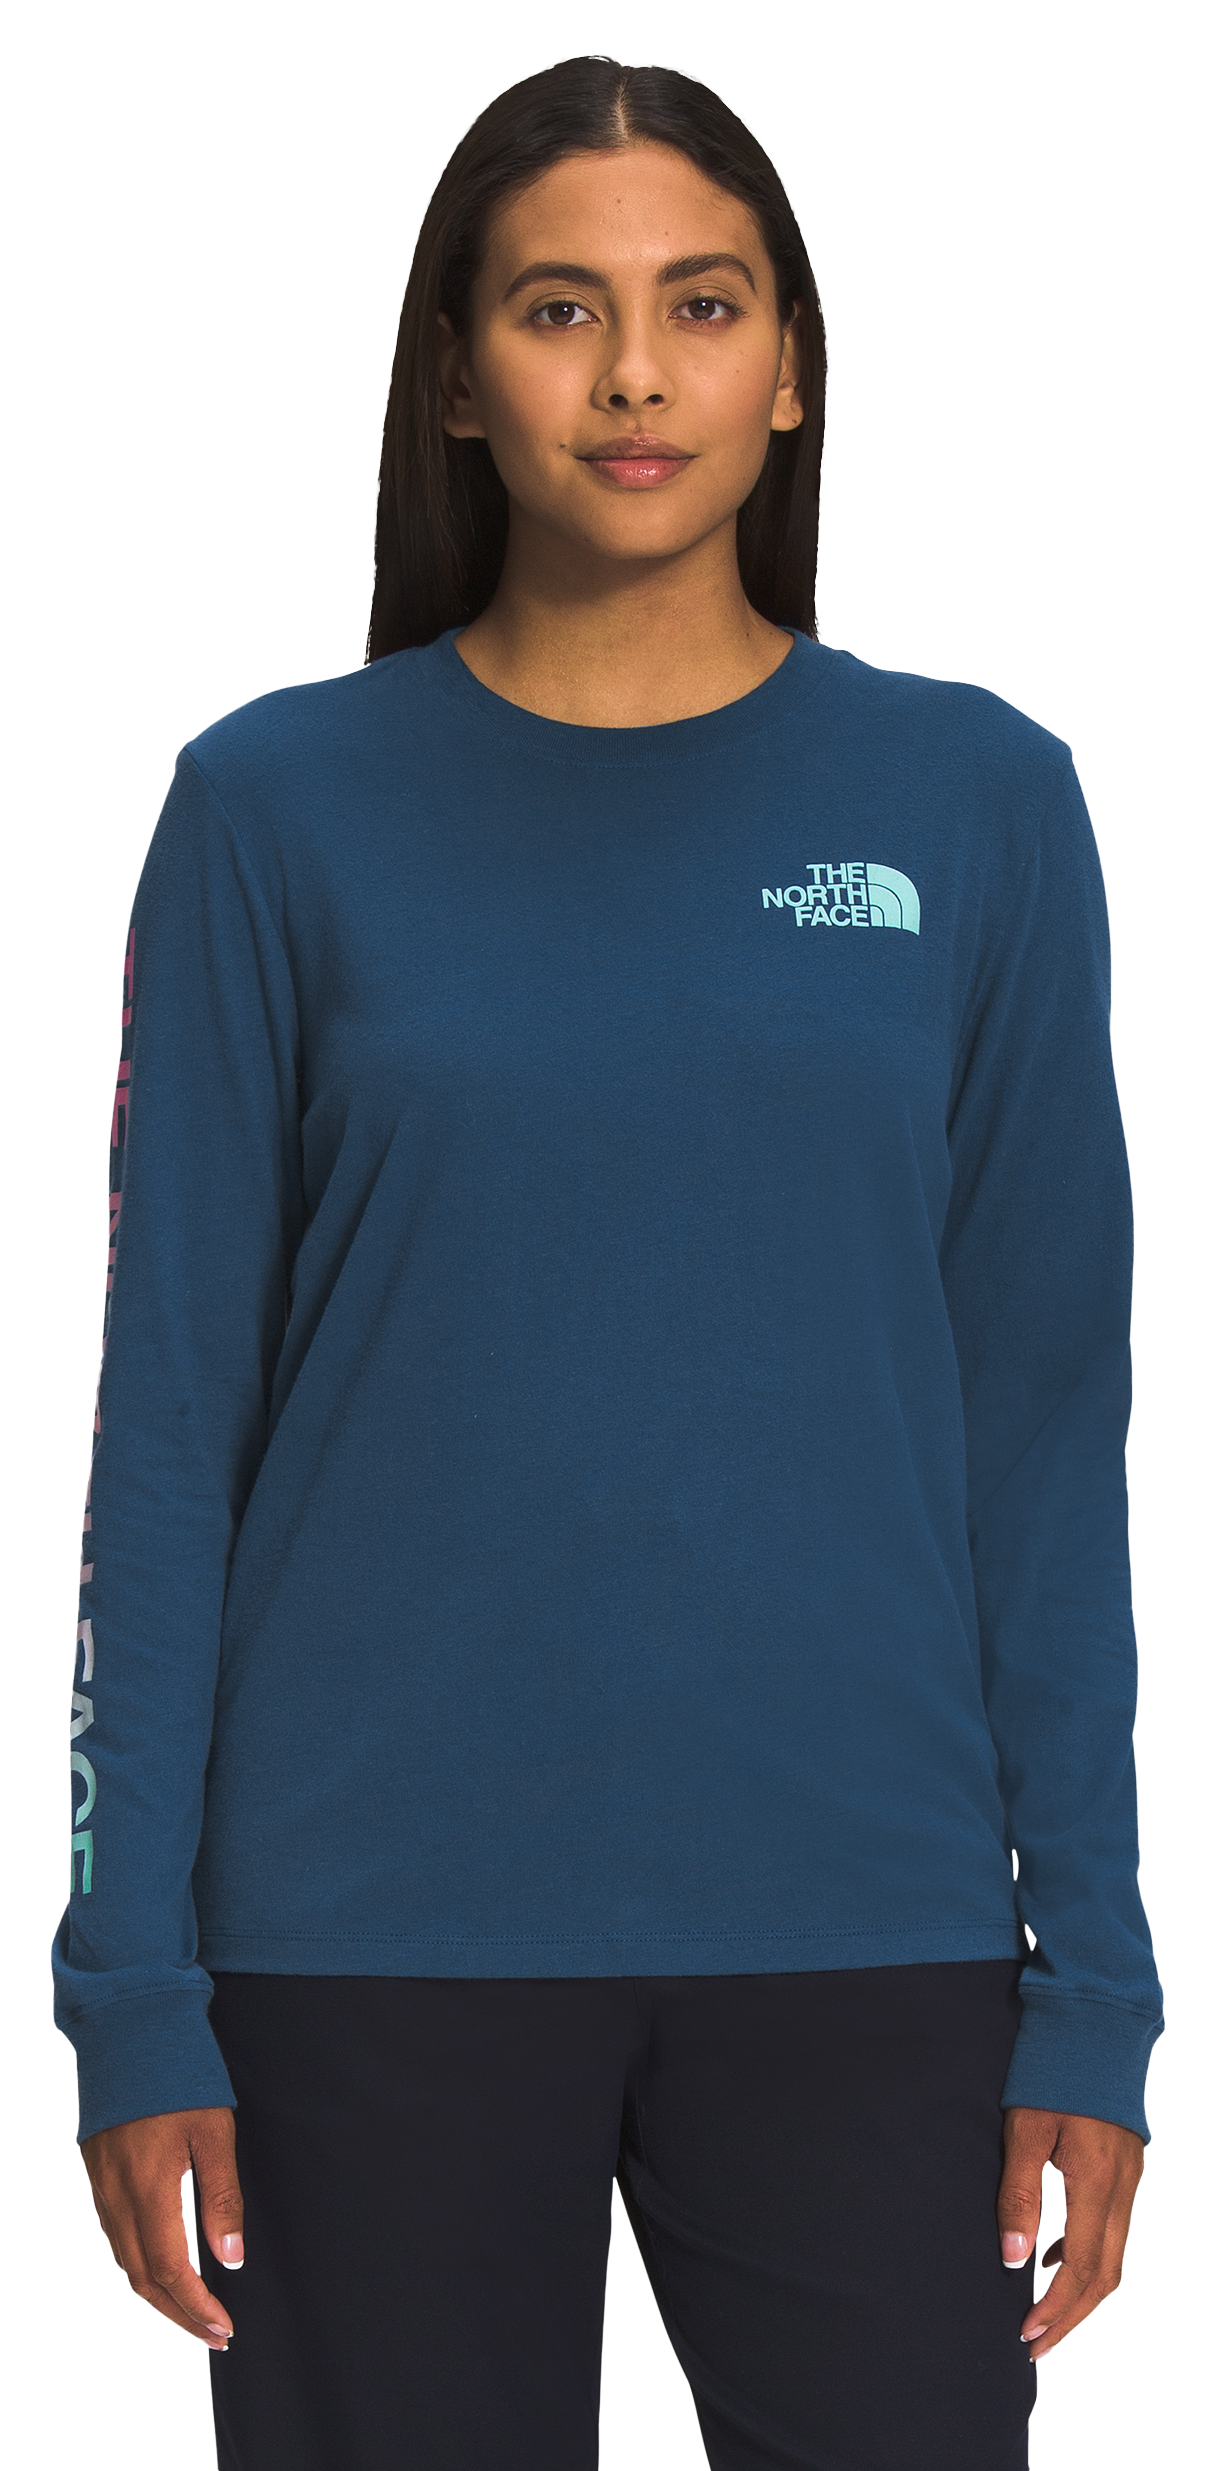 The North Face Brand Proud Long-Sleeve Shirt for Ladies